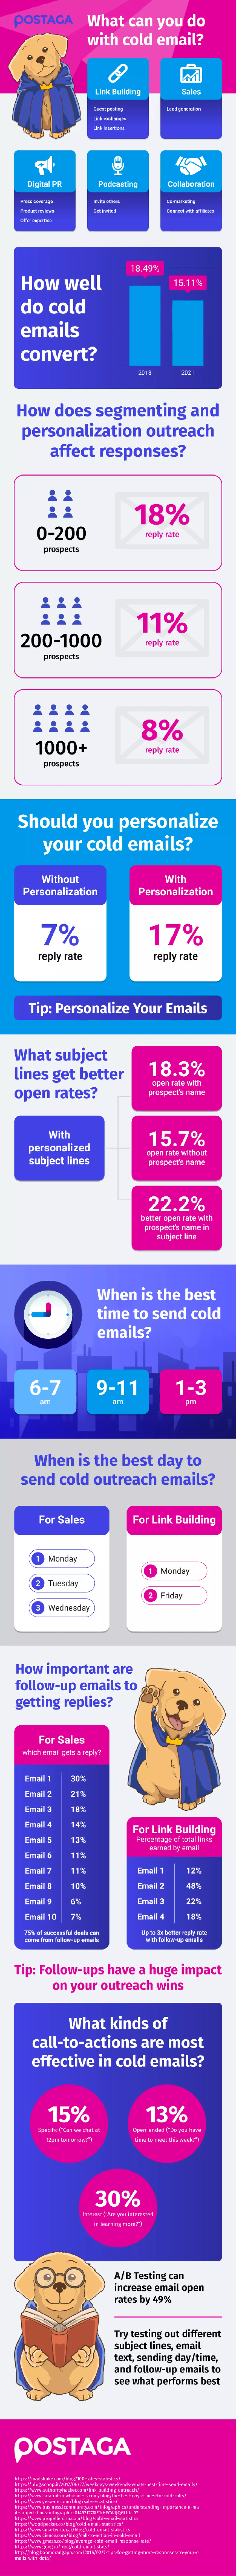 cold email statistics